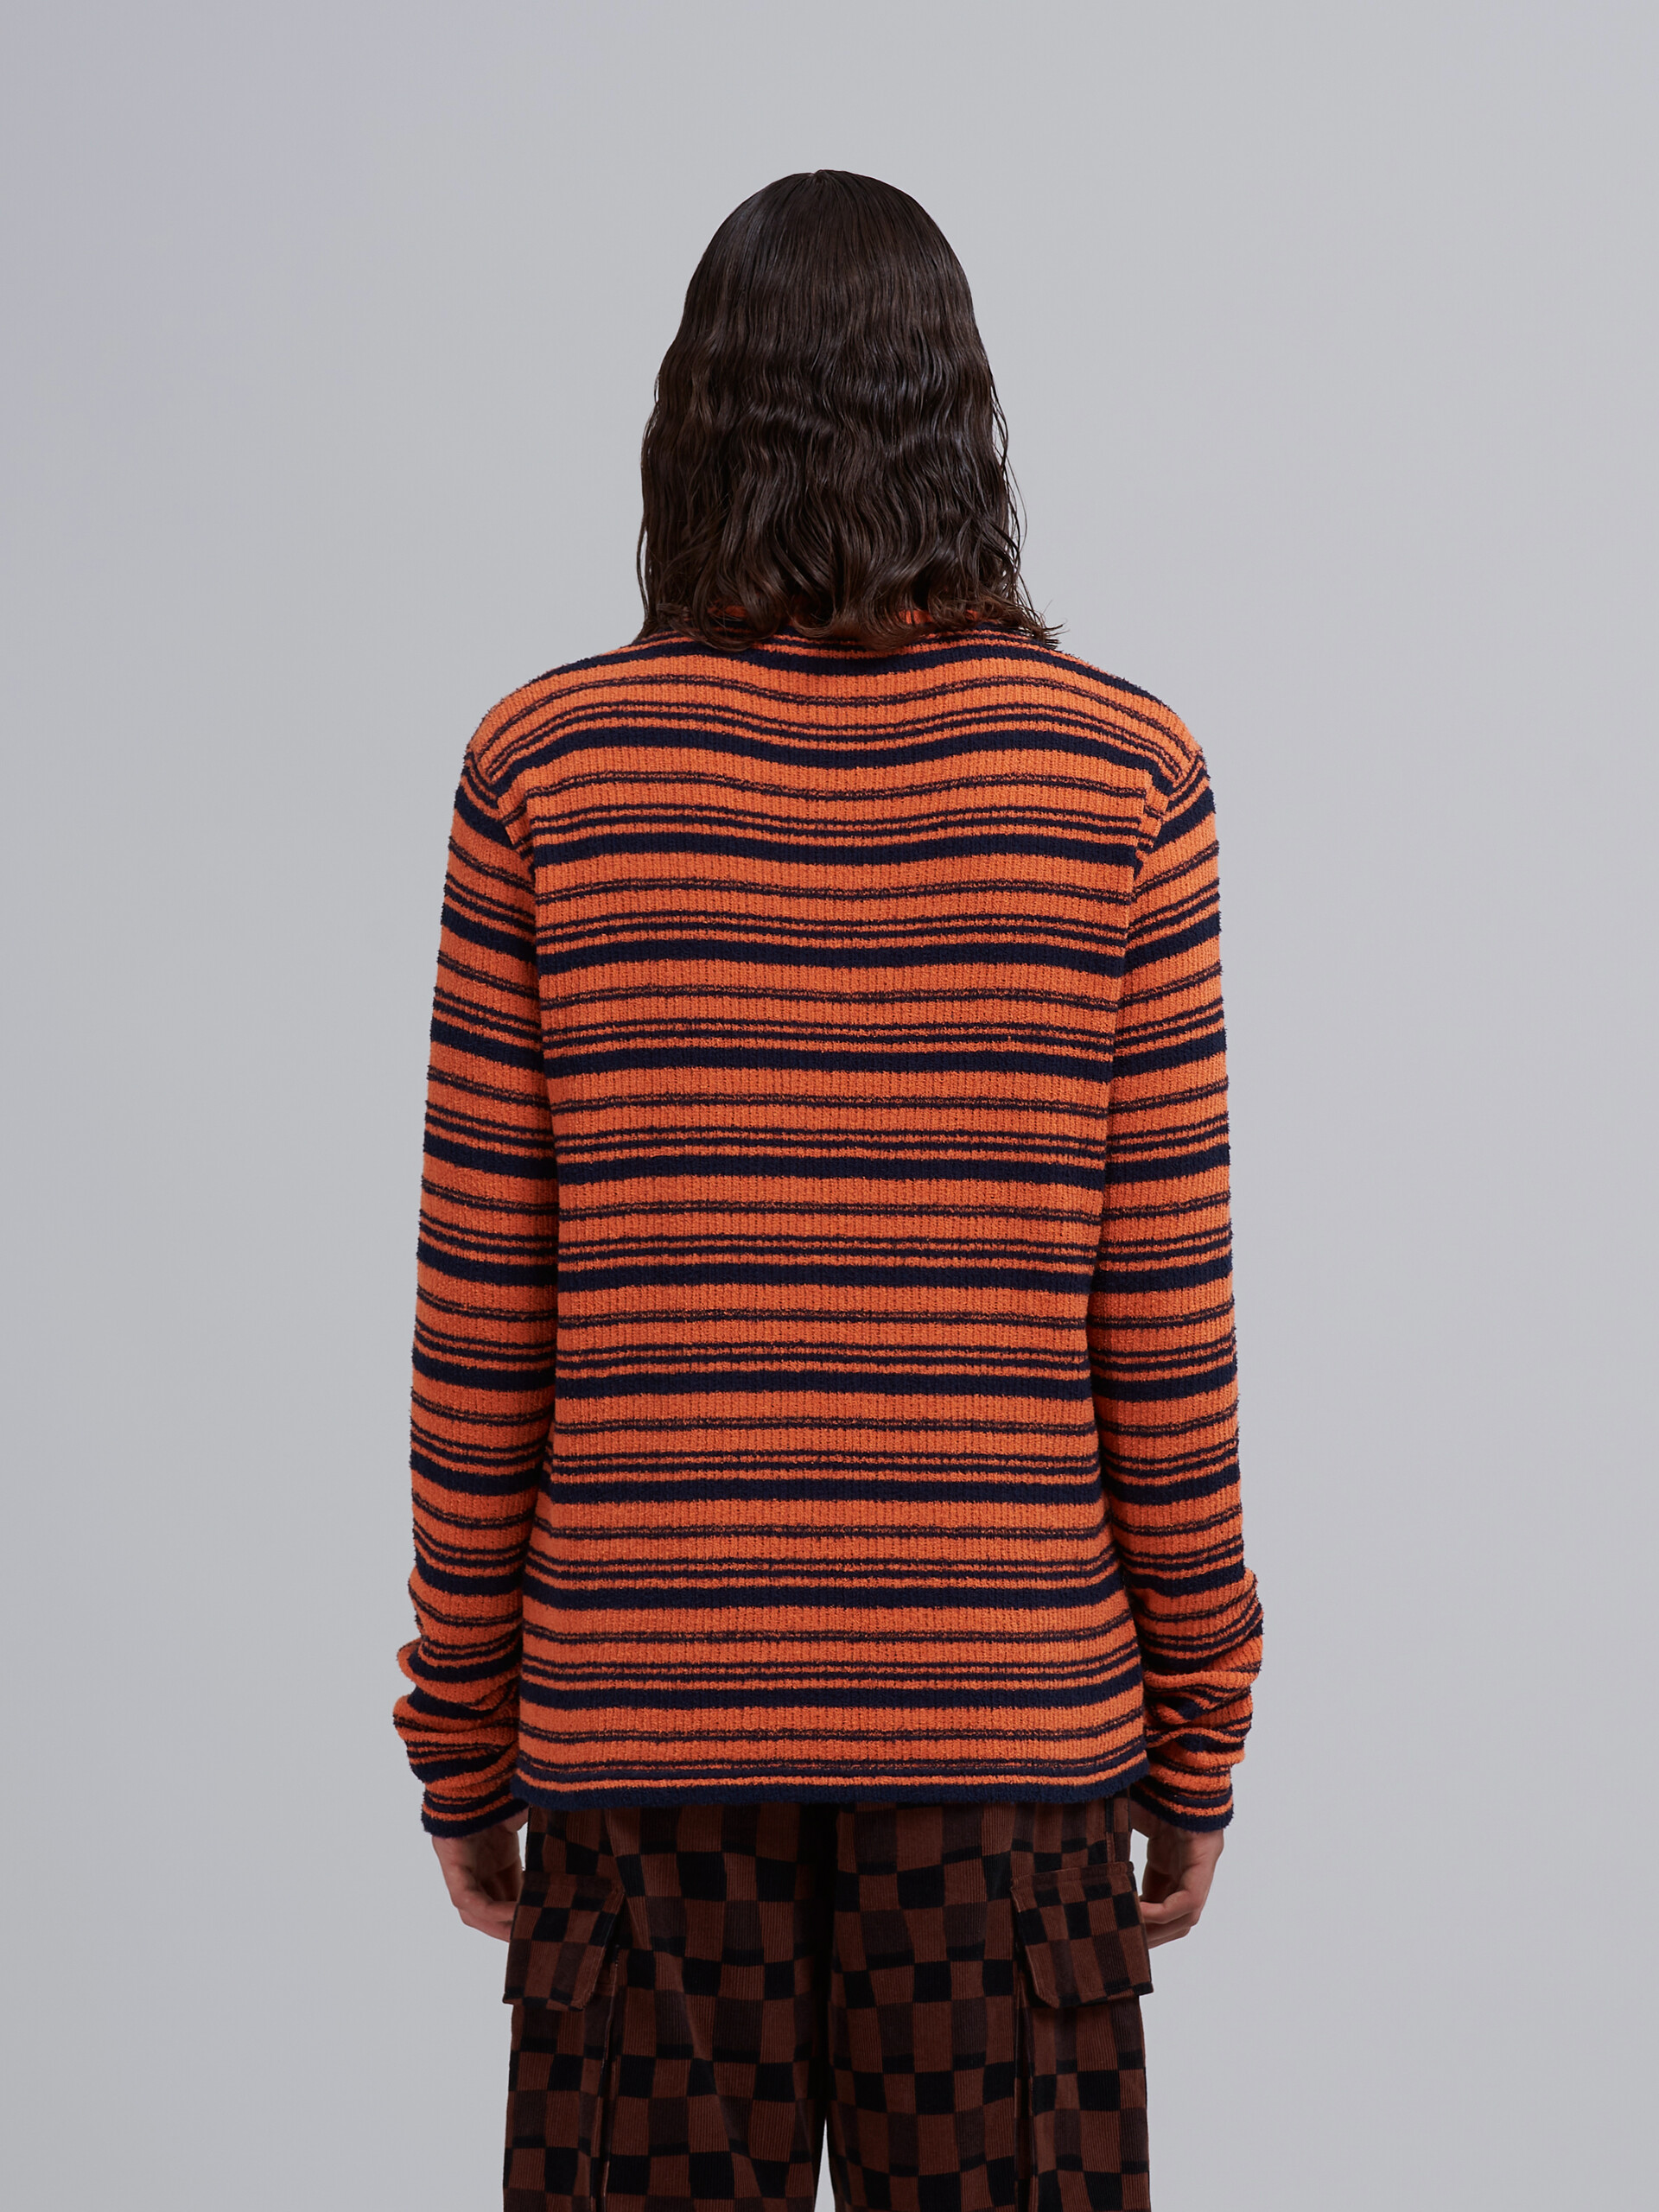 Terry-cloth effect striped cotton blend sweater - Pullovers - Image 3